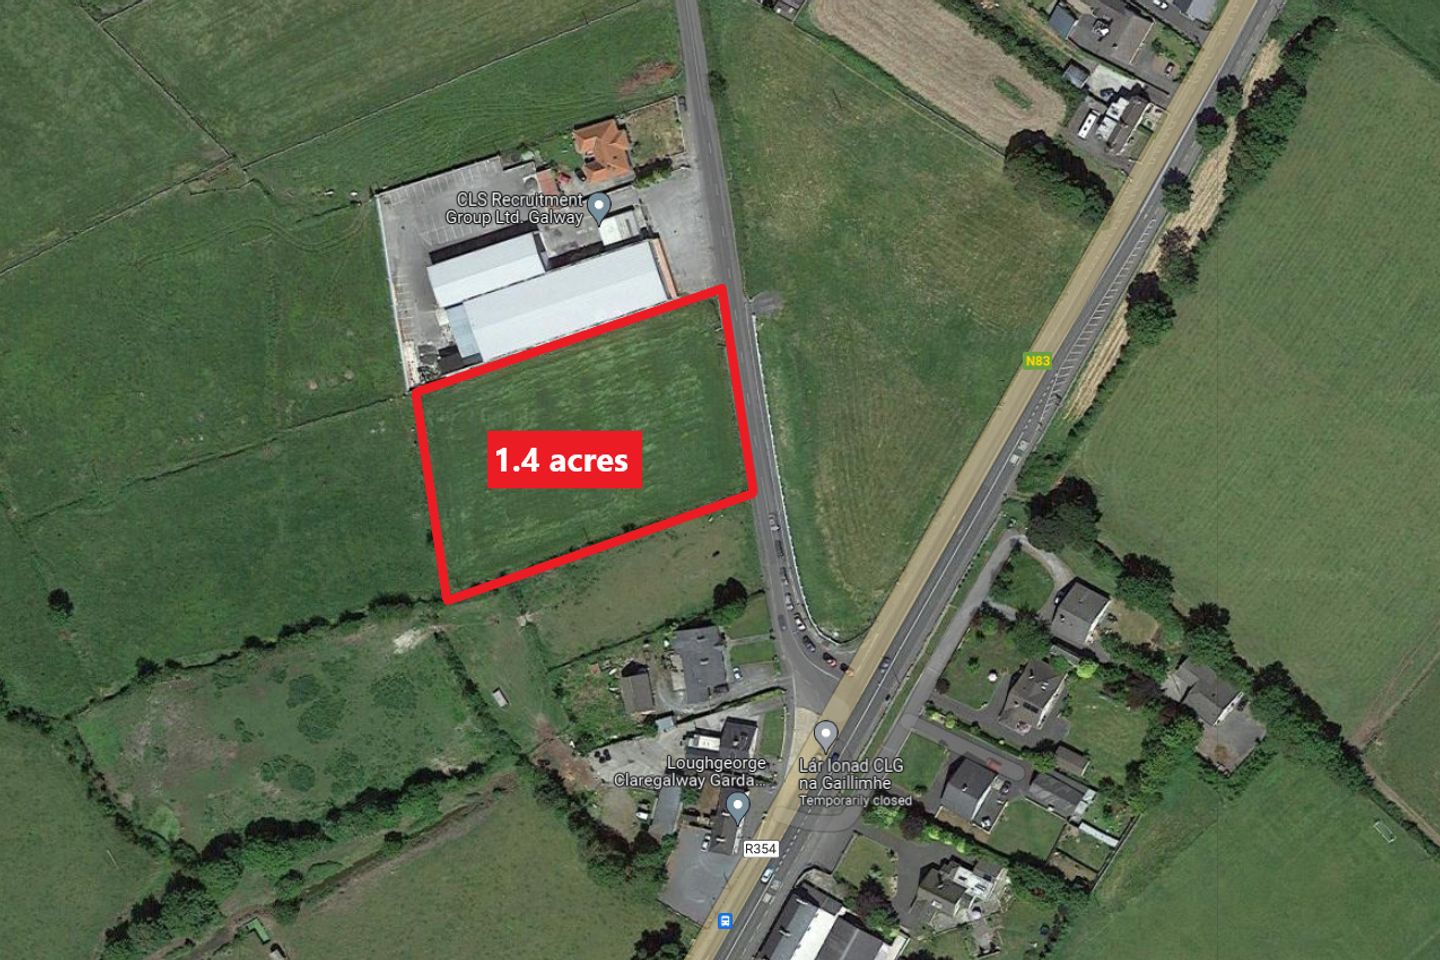 1.4 acres - Subject to Planning Permission, Gortadooey, Claregalway, Co. Galway